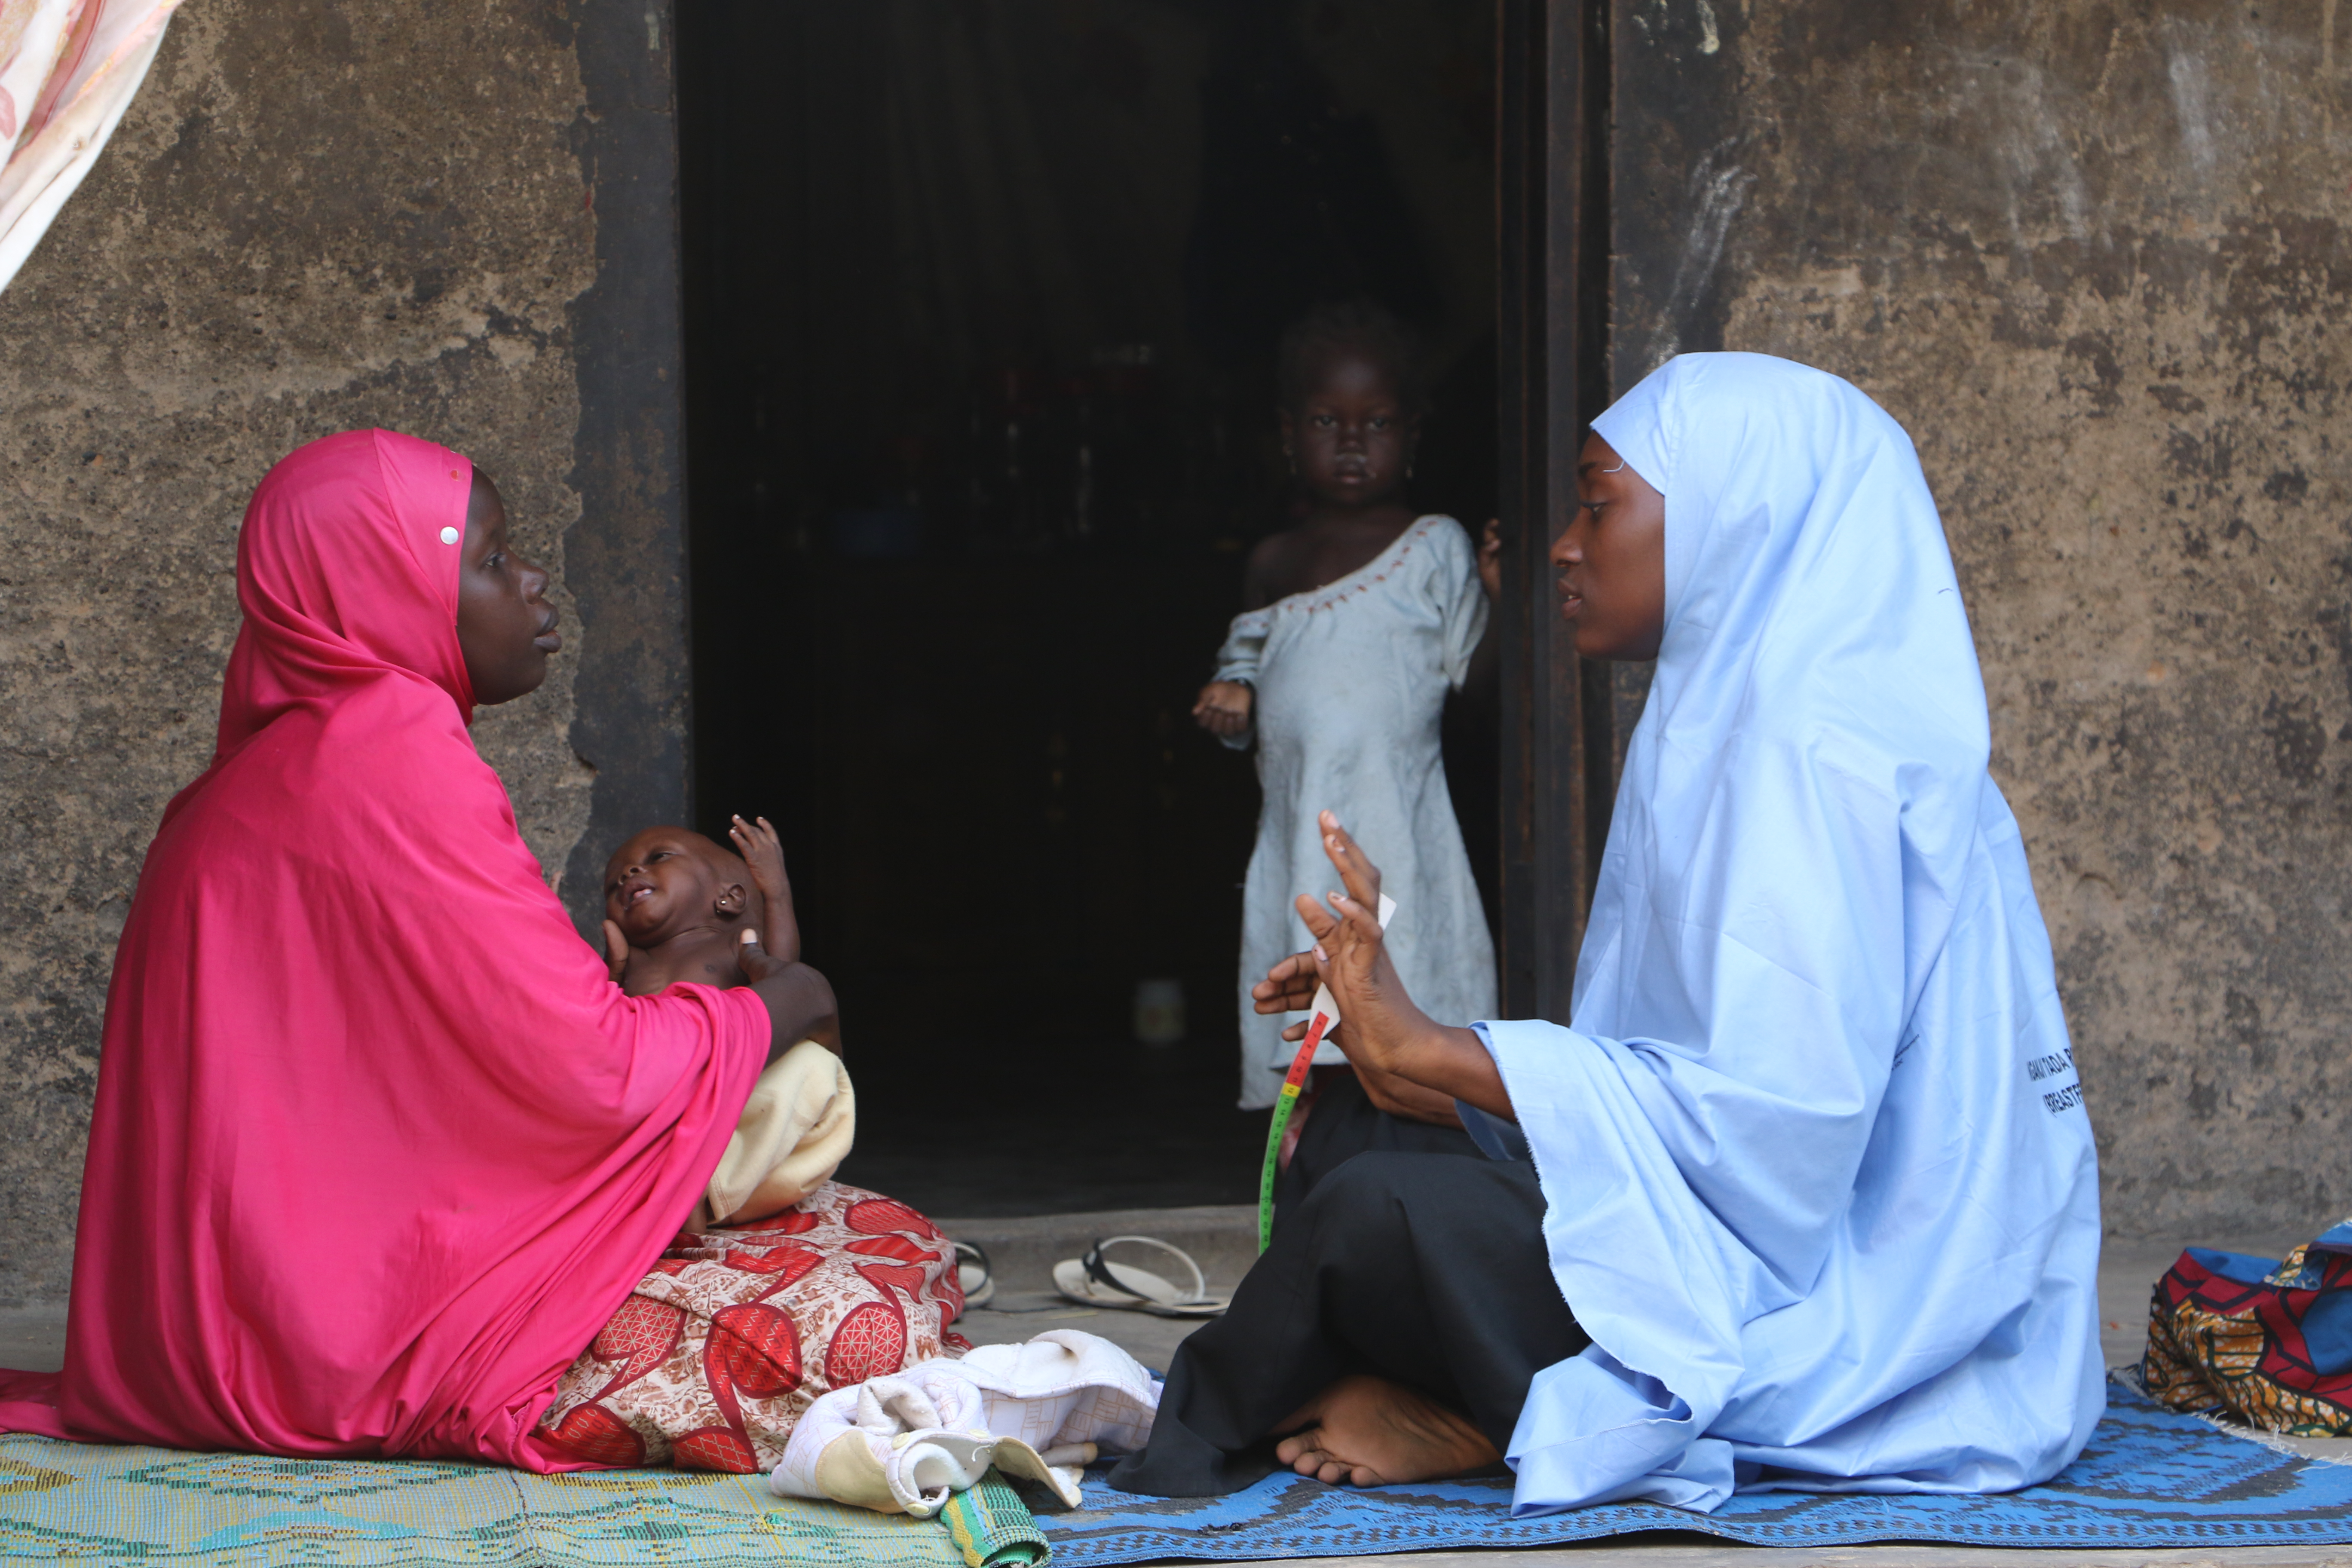 A volunteer visits a displaced family in Maiduguri